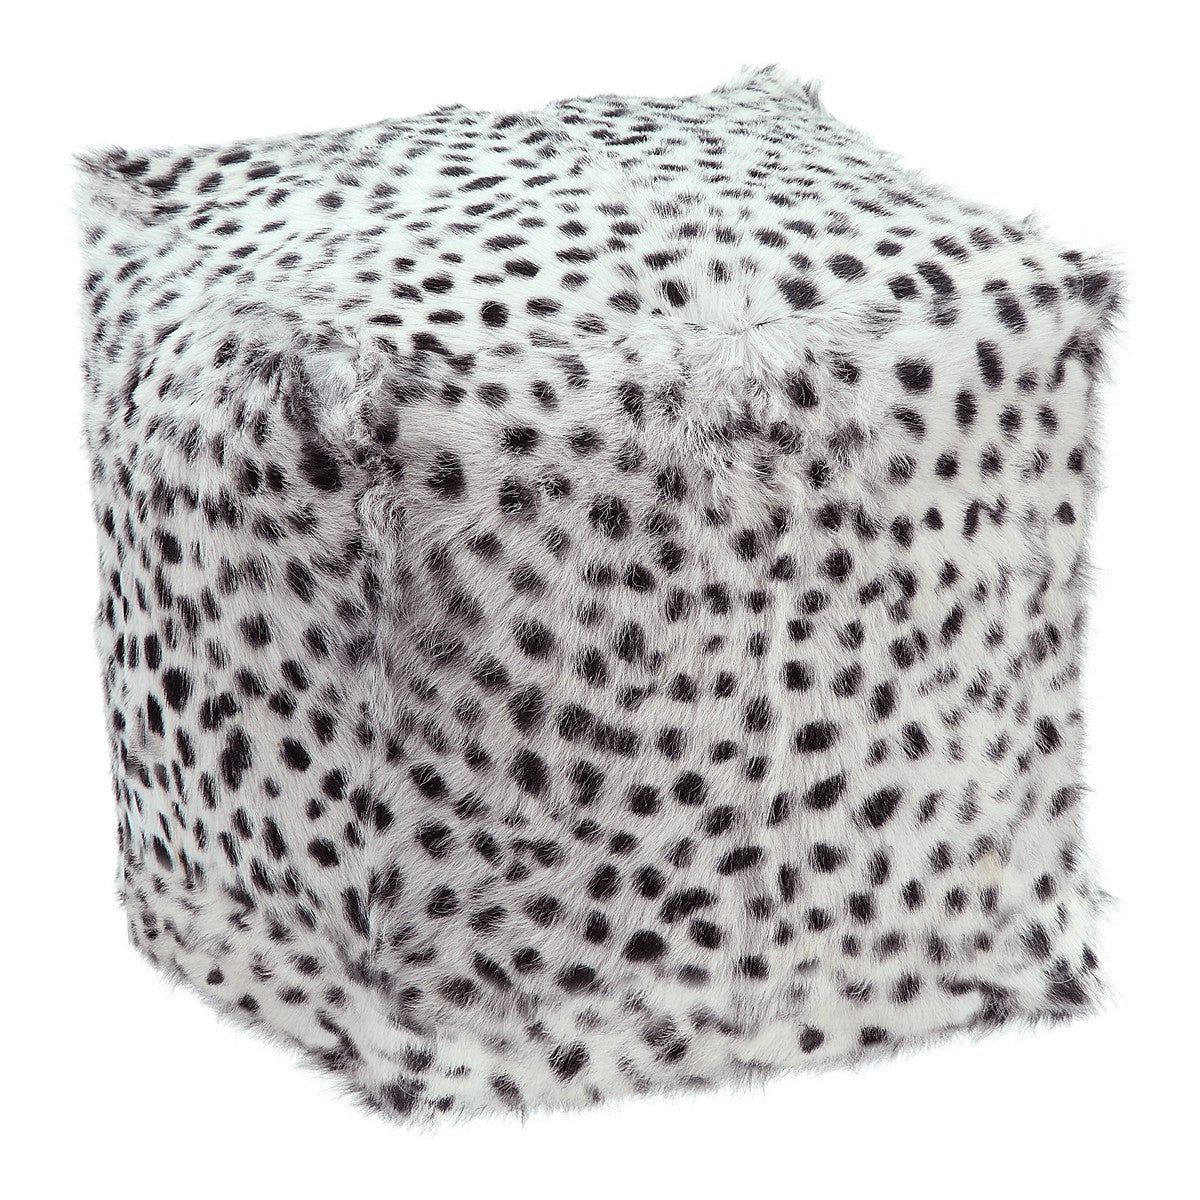 Moe's Home Collection Spotted Goat Fur Pouf Light Grey - XU-1016-15 - Moe's Home Collection - pillow - Minimal And Modern - 1